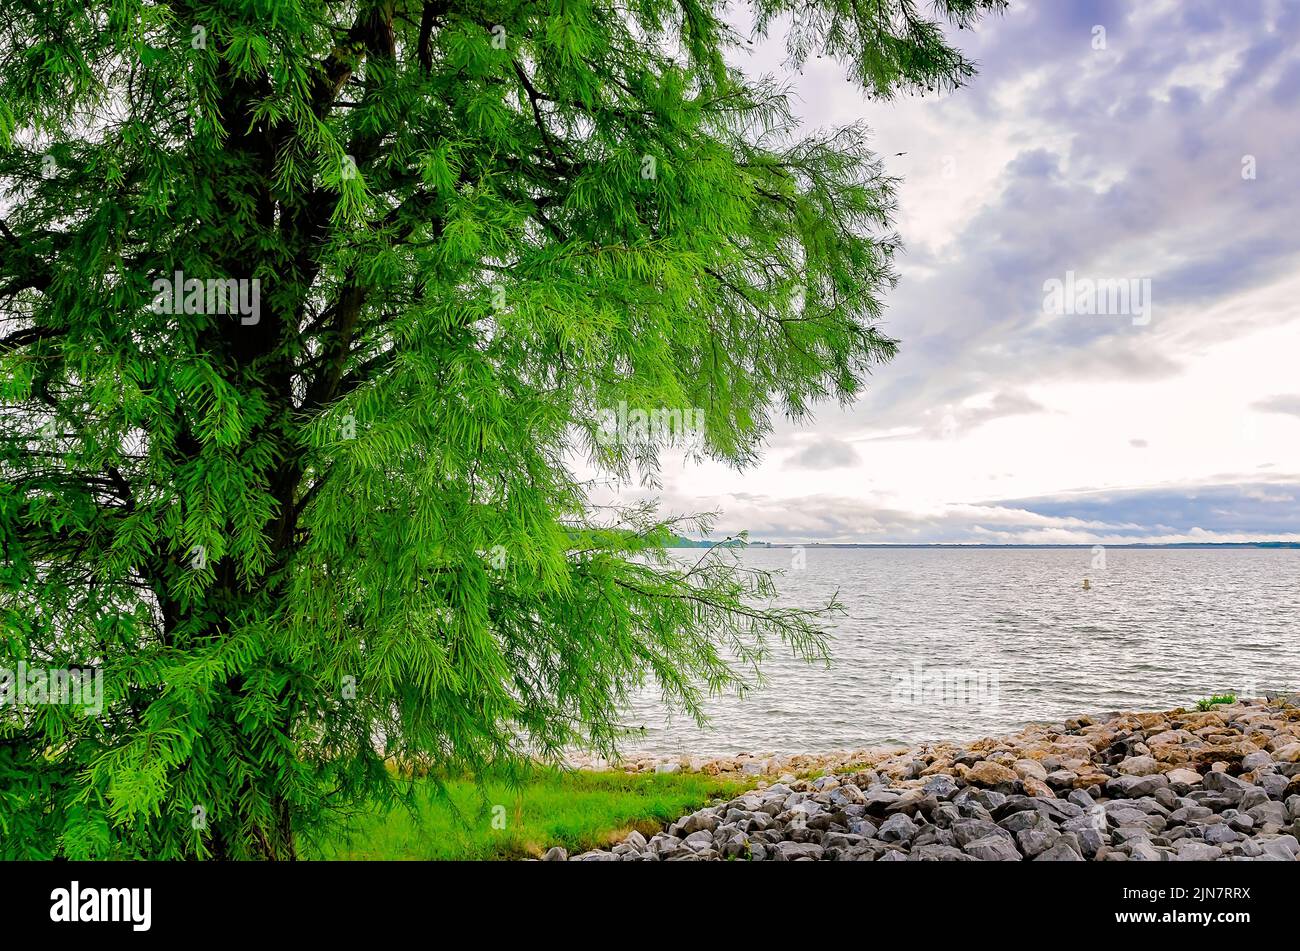 A bald cypress tree (Taxodium distichum) grows along the edge of Sardis Lake, May 31, 2015 in Batesville, Mississippi. Stock Photo